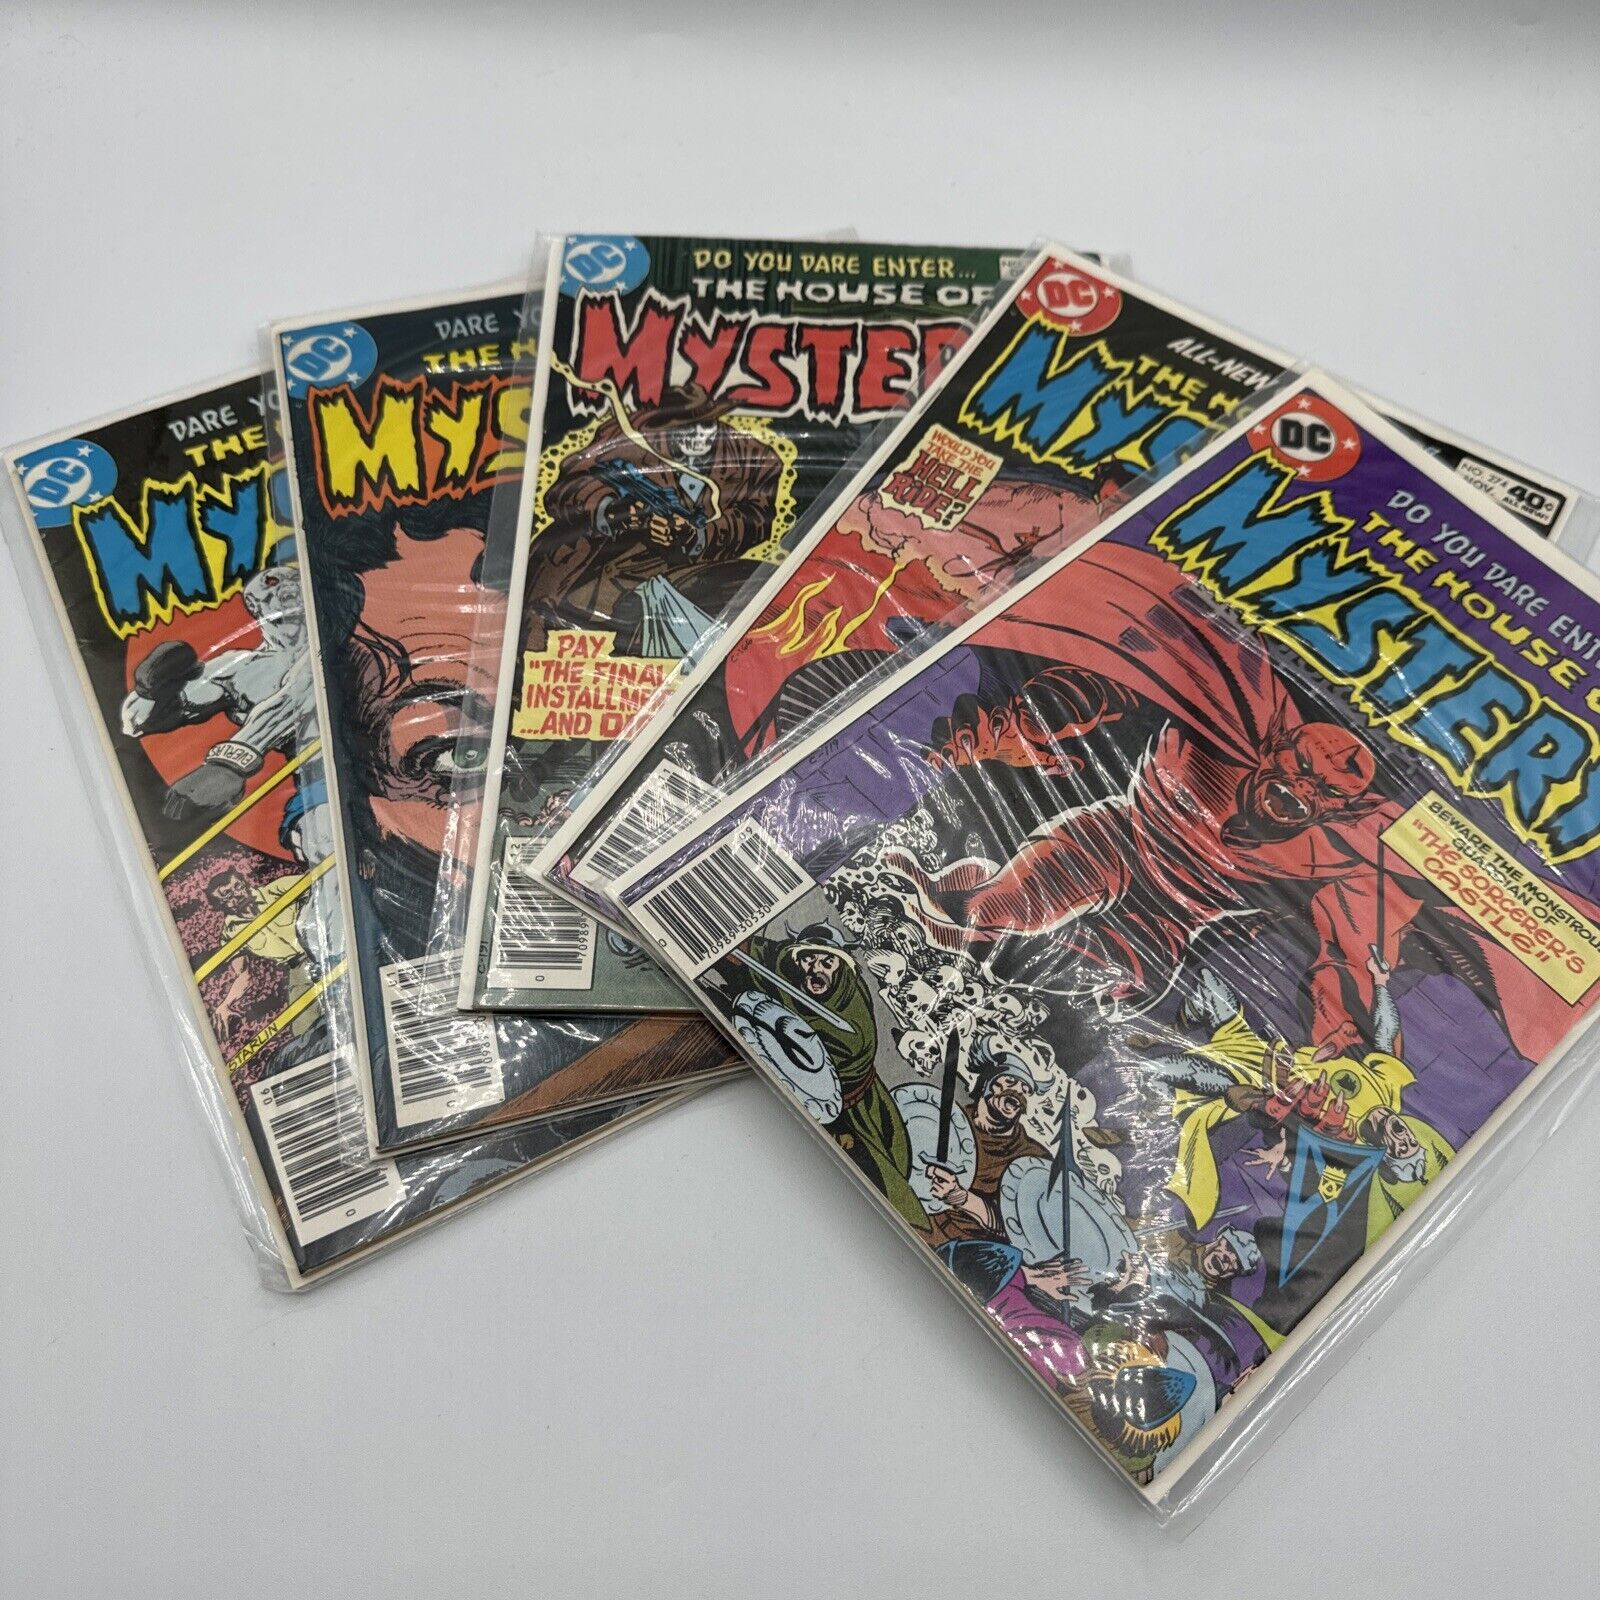 DO YOU DARE ENTER THE HOUSE OF MYSTERY Lot of 5 #272, 274, 275, 276, 281 Boarded